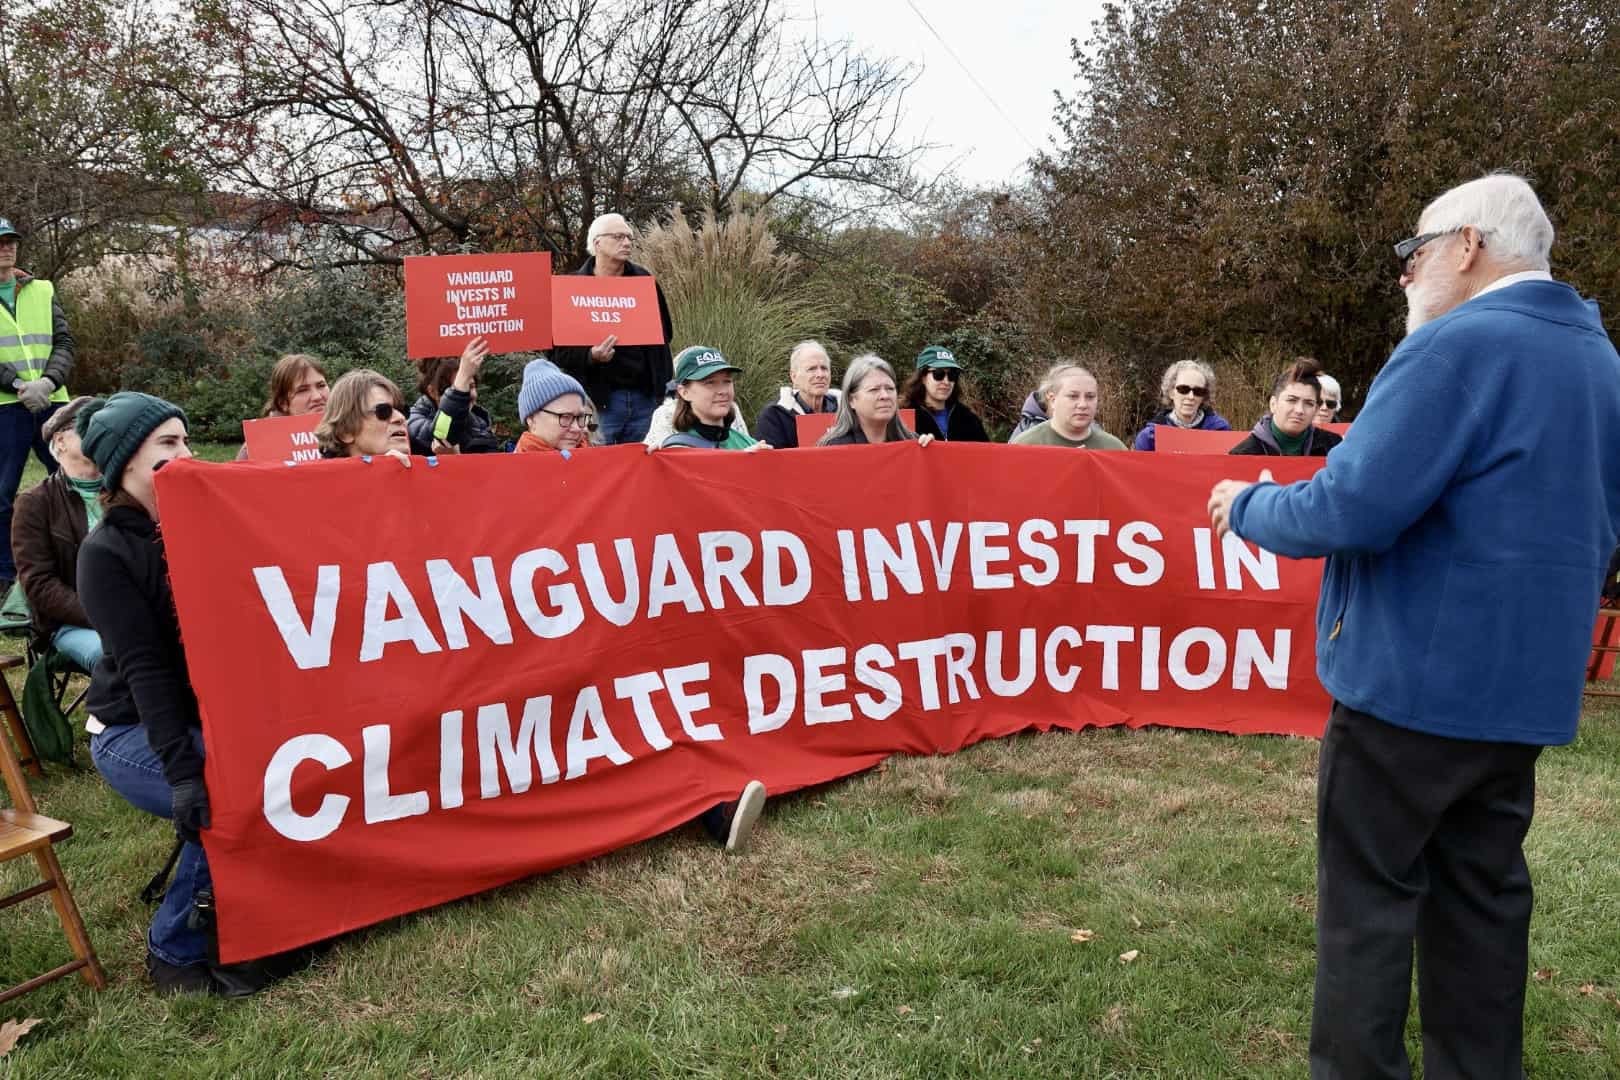 About two dozen people sit on chairs in two rows outside. Those in the first row hold a large red banner with white text that says "Vanguard invests in climate destruction."